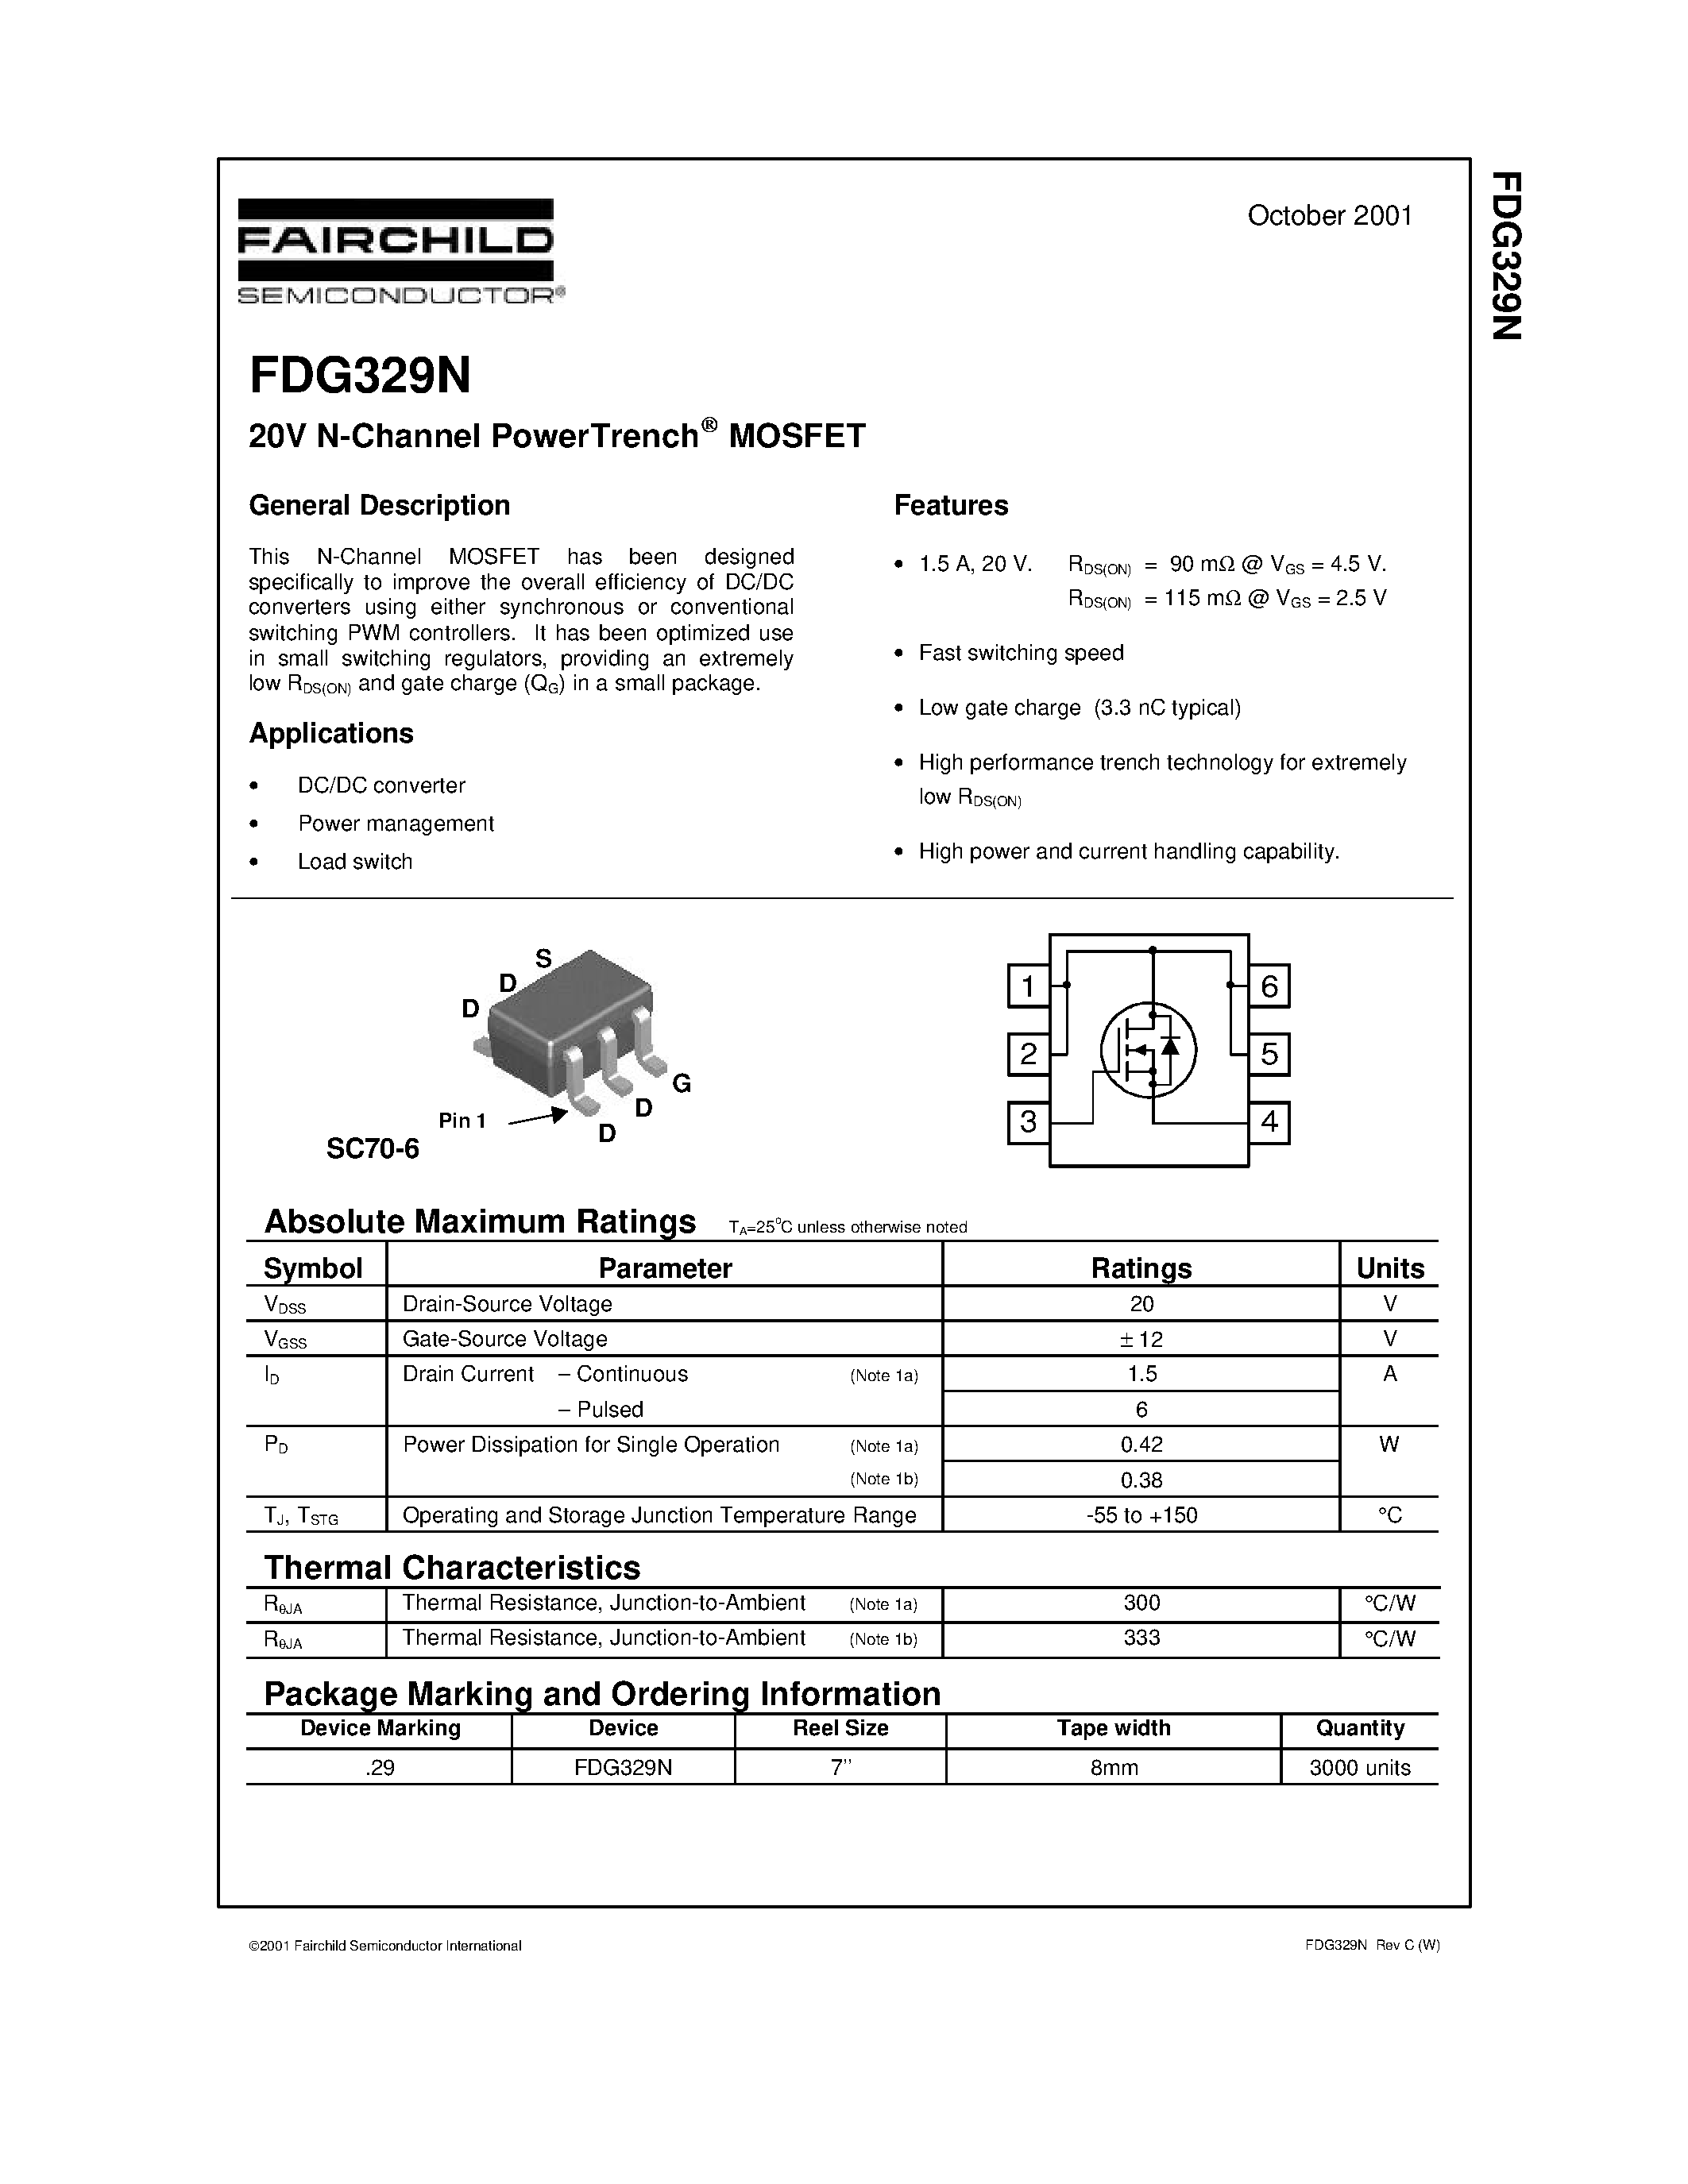 Datasheet FDG329N - 20V N-Channel PowerTrench MOSFET page 1